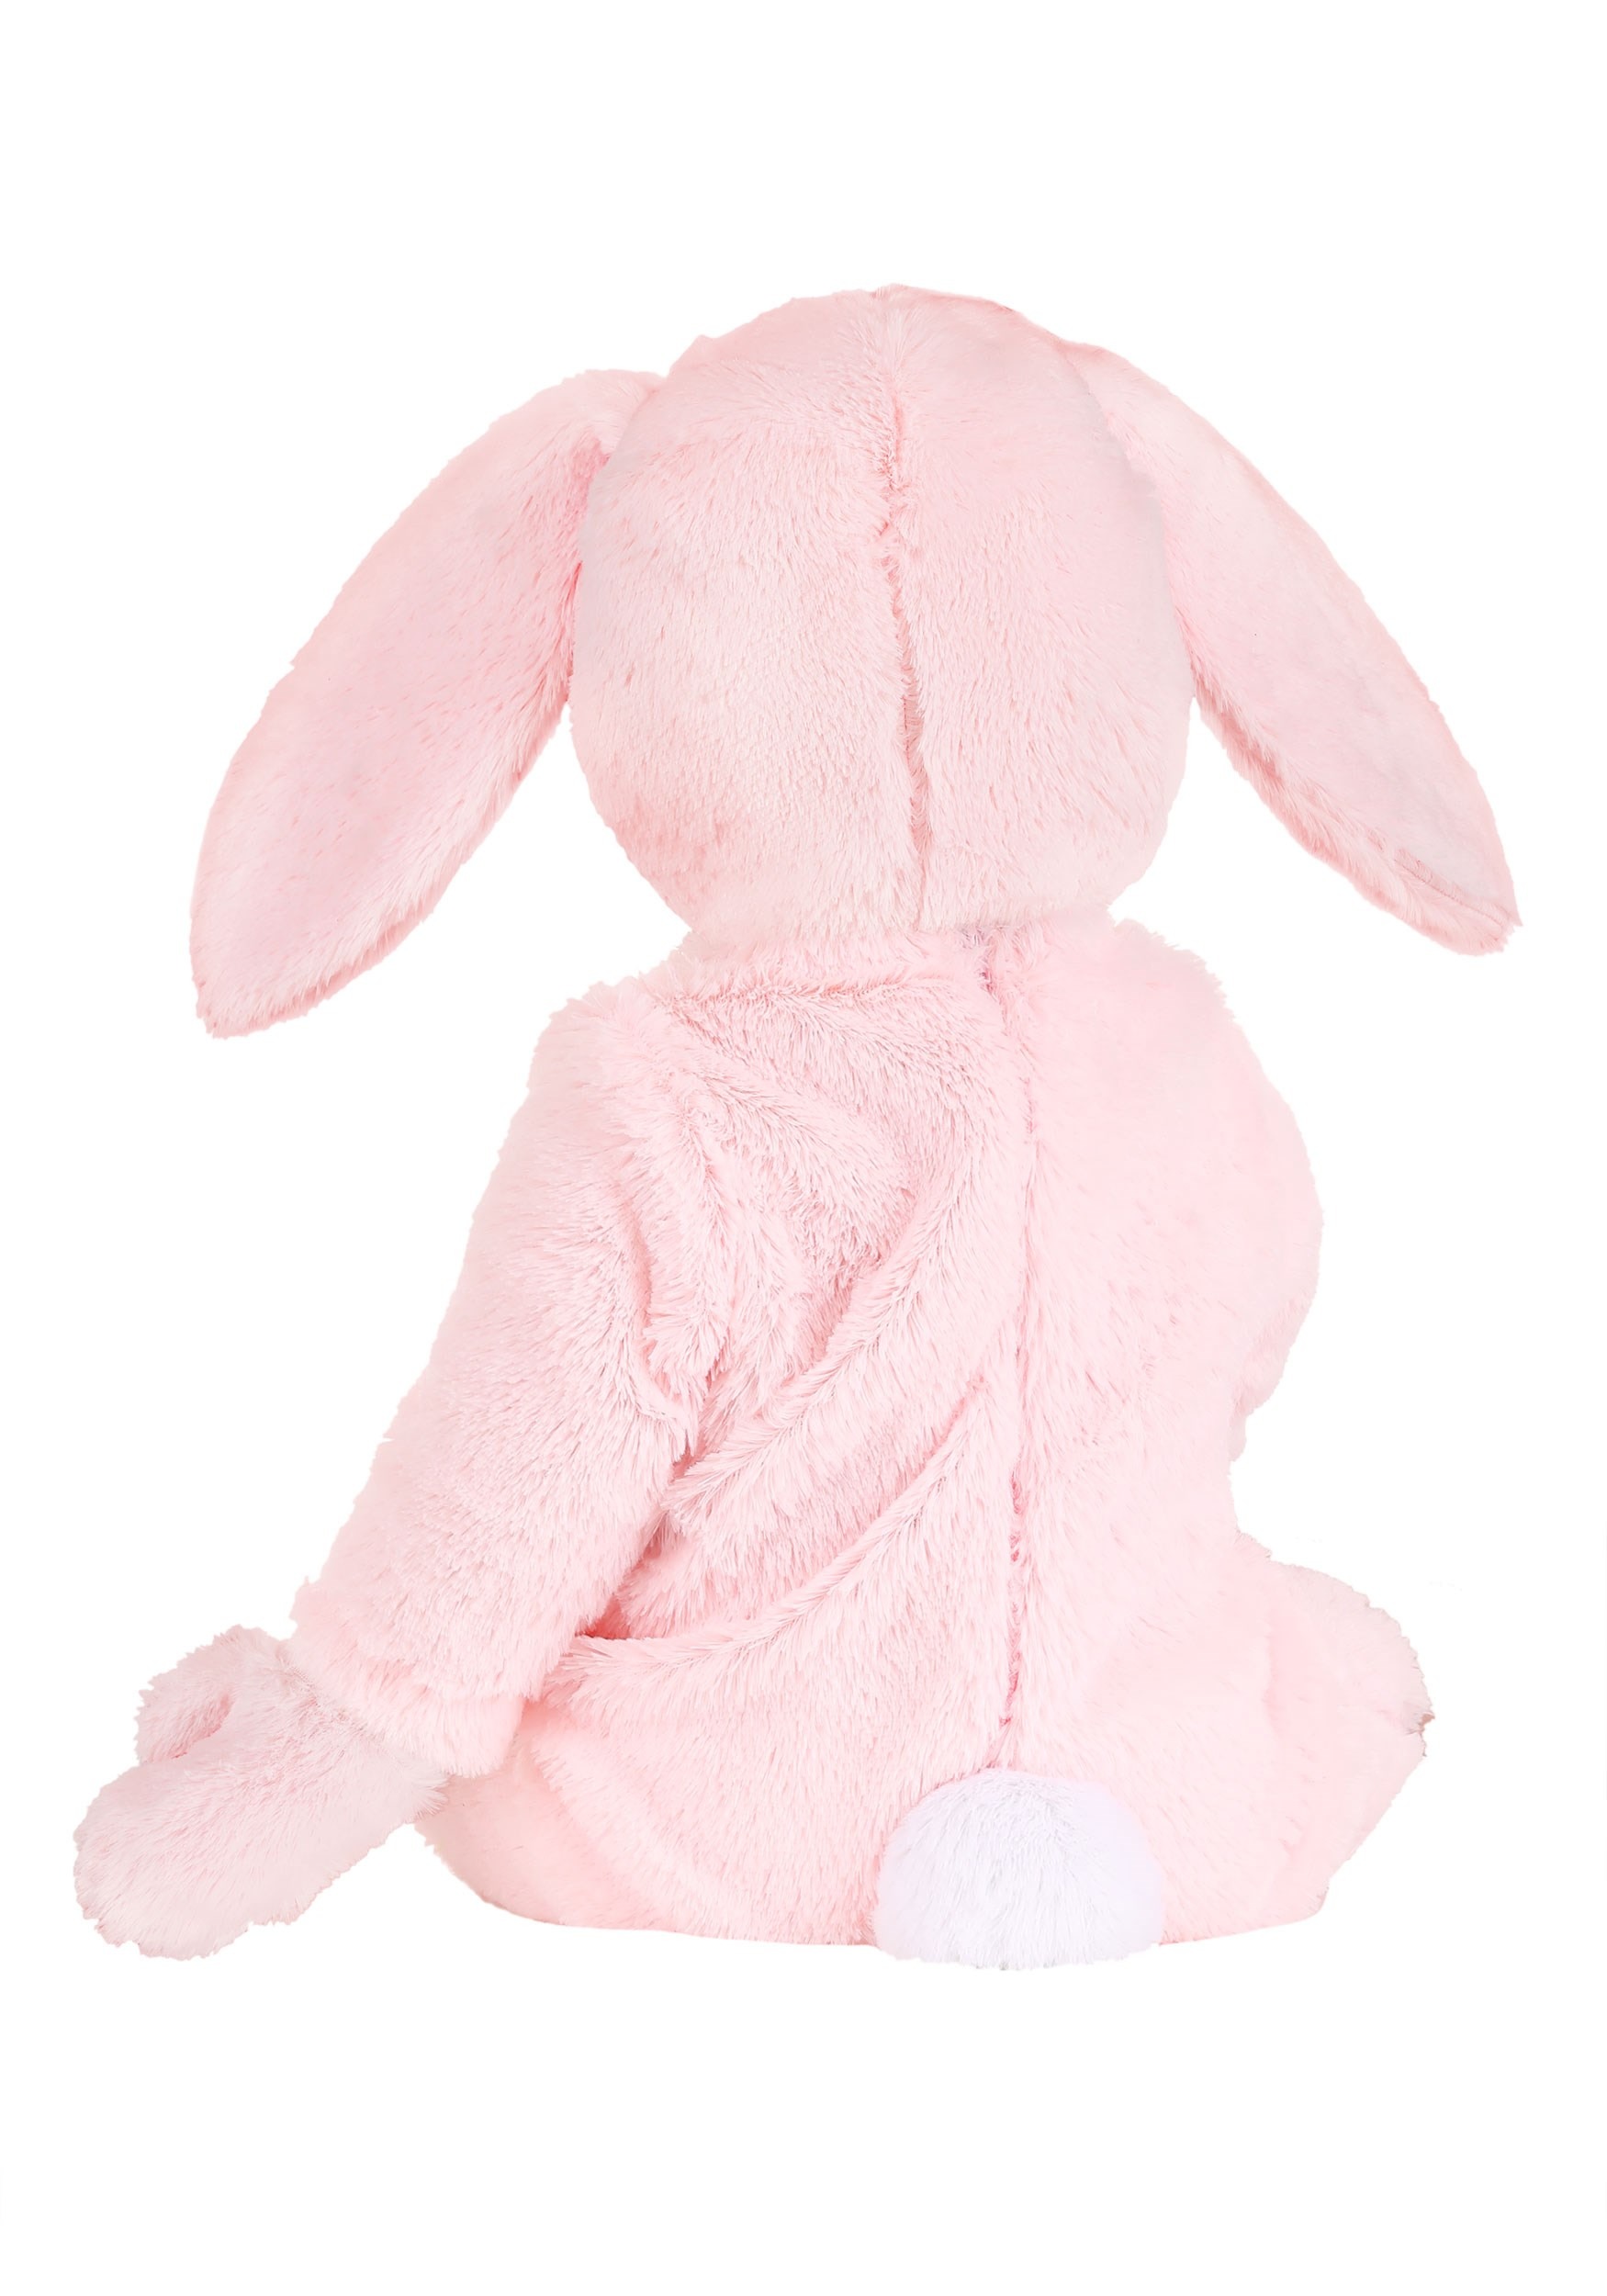 Fluffy Pink Bunny Baby Costume